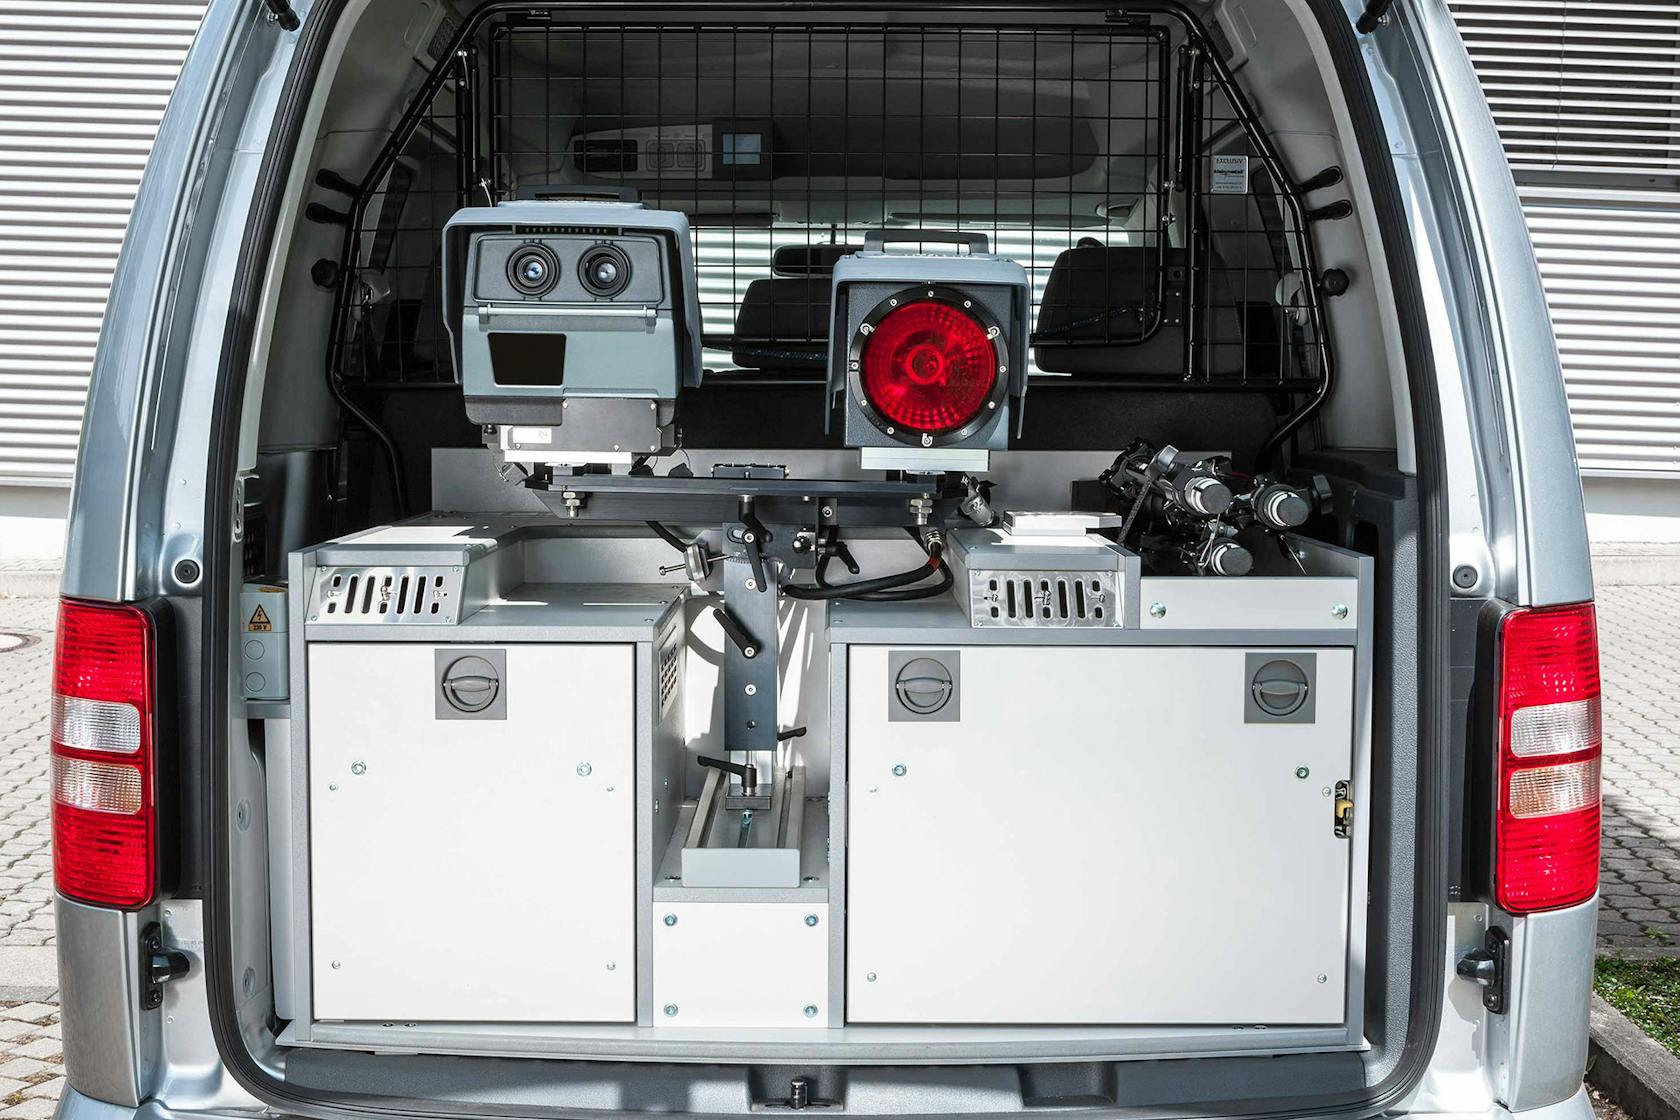 VITRONIC Australia awarded a contract for mobile speed cameras